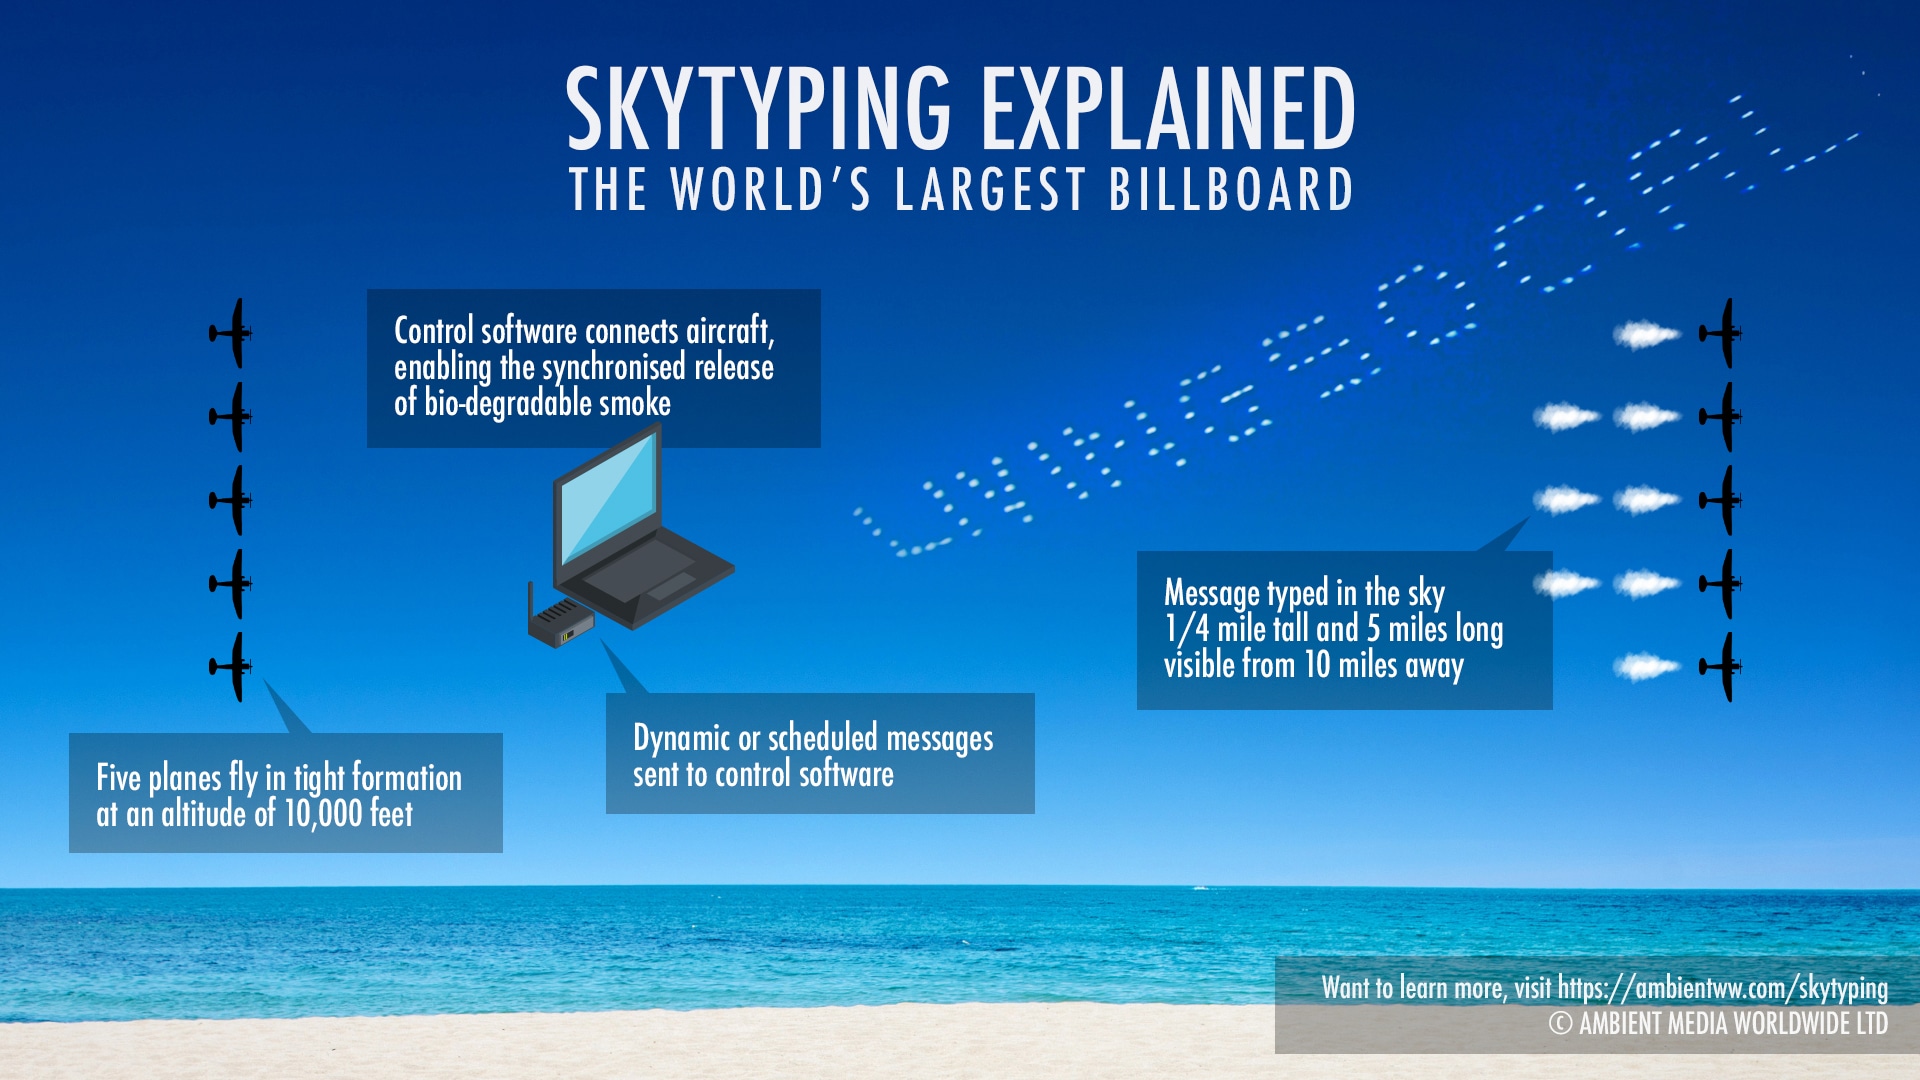 Skytyping explained infographic